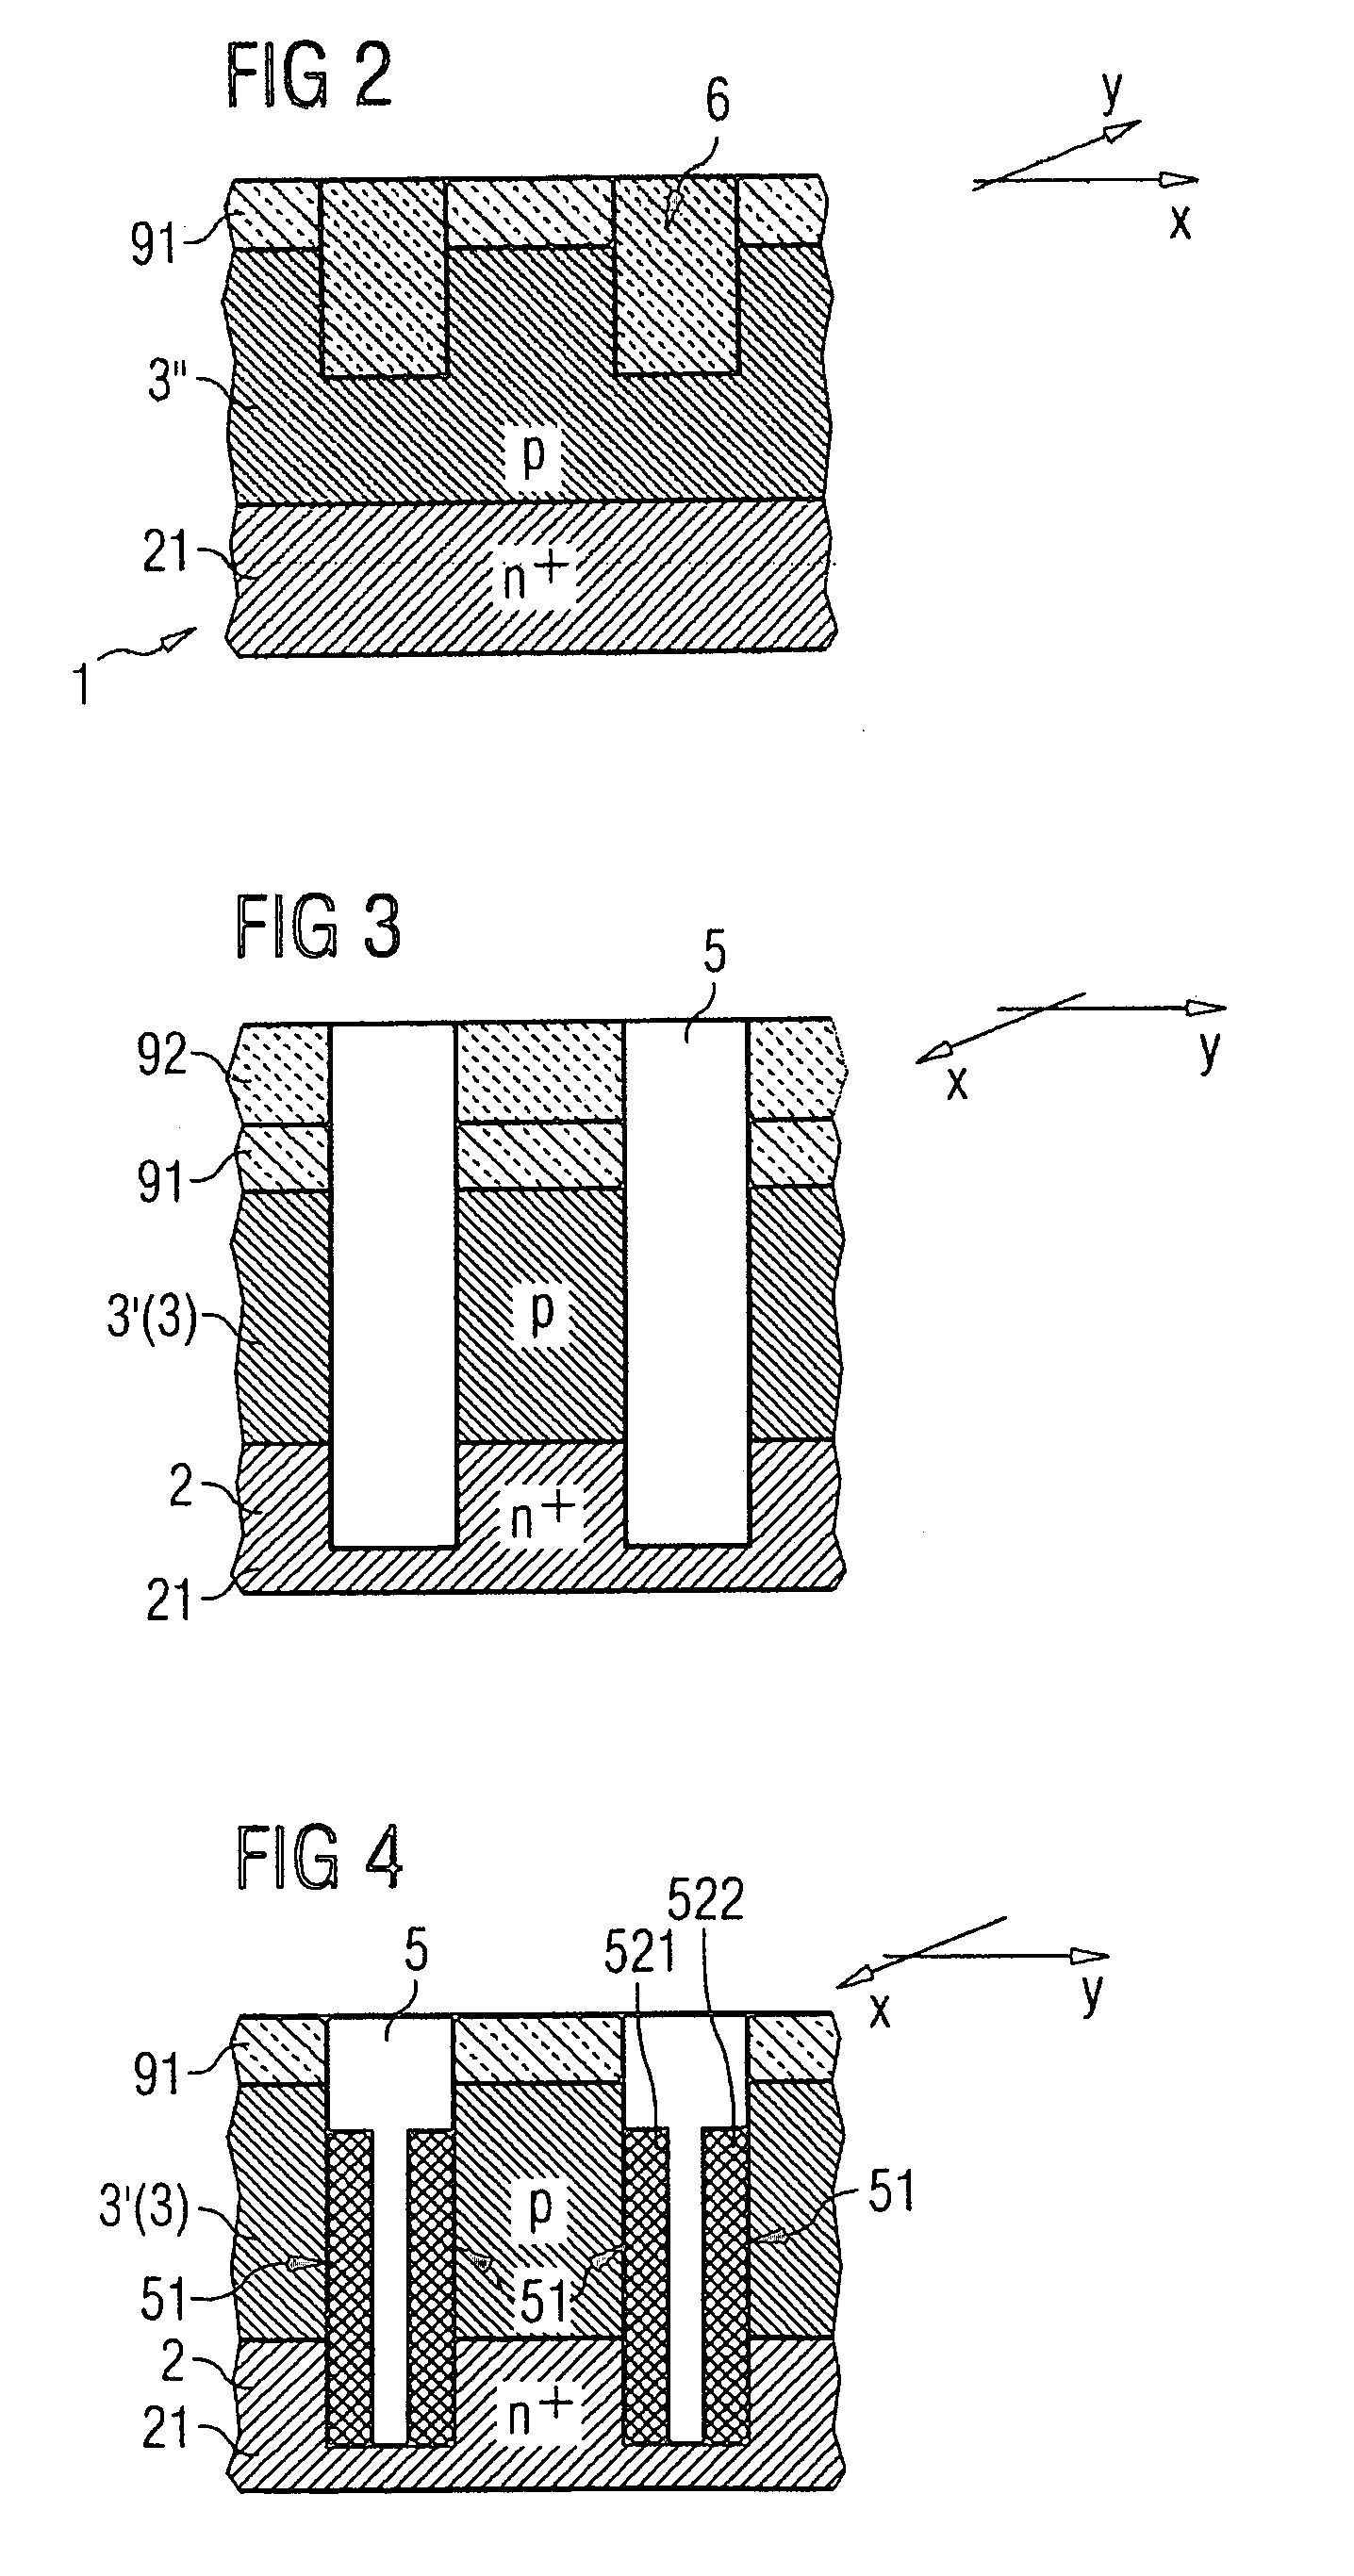 Architecture for vertical transistor cells and transistor-controlled memory cells